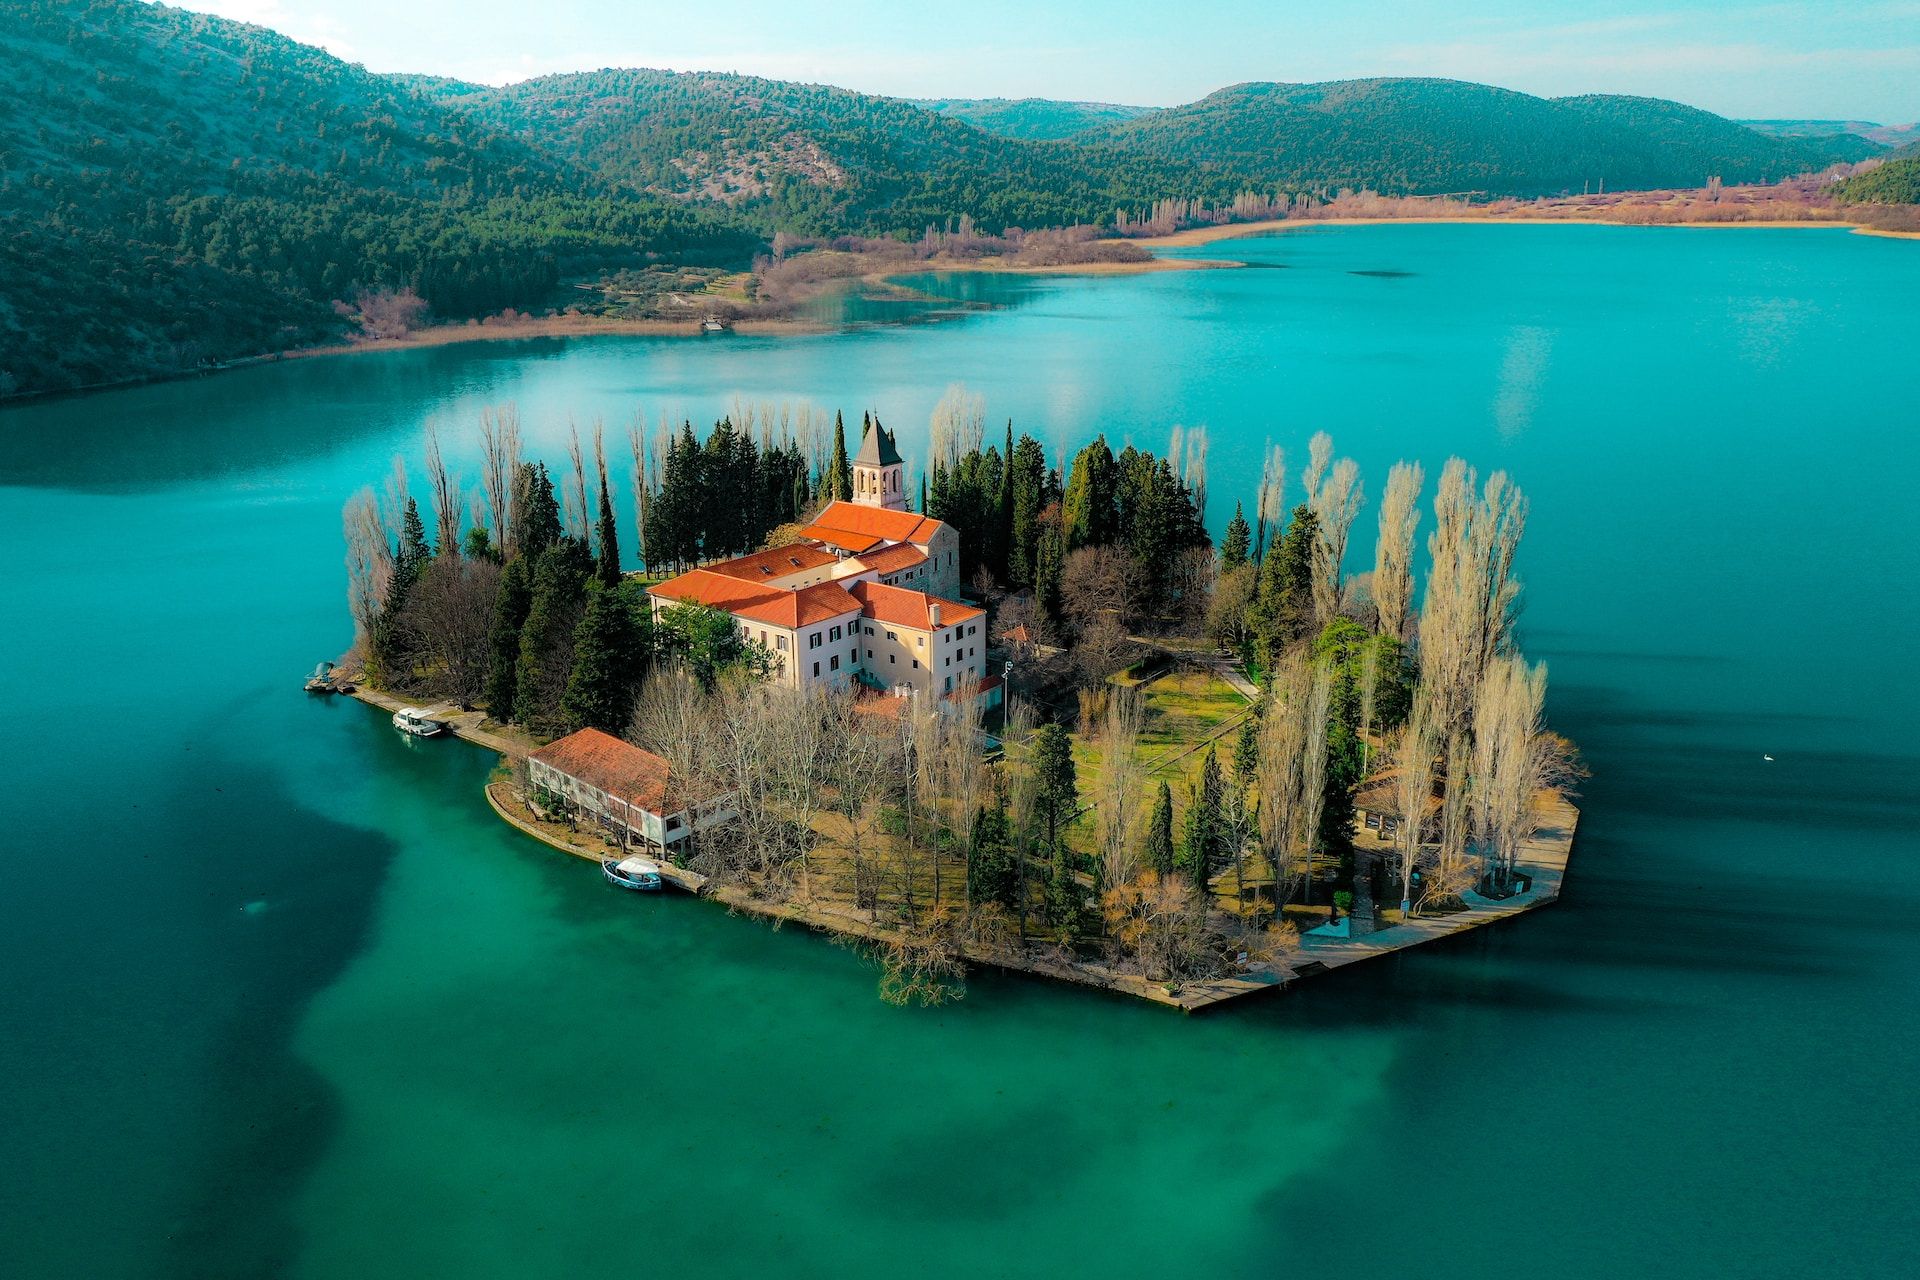 Island with a church in the middle of a lake surrounded by mountains